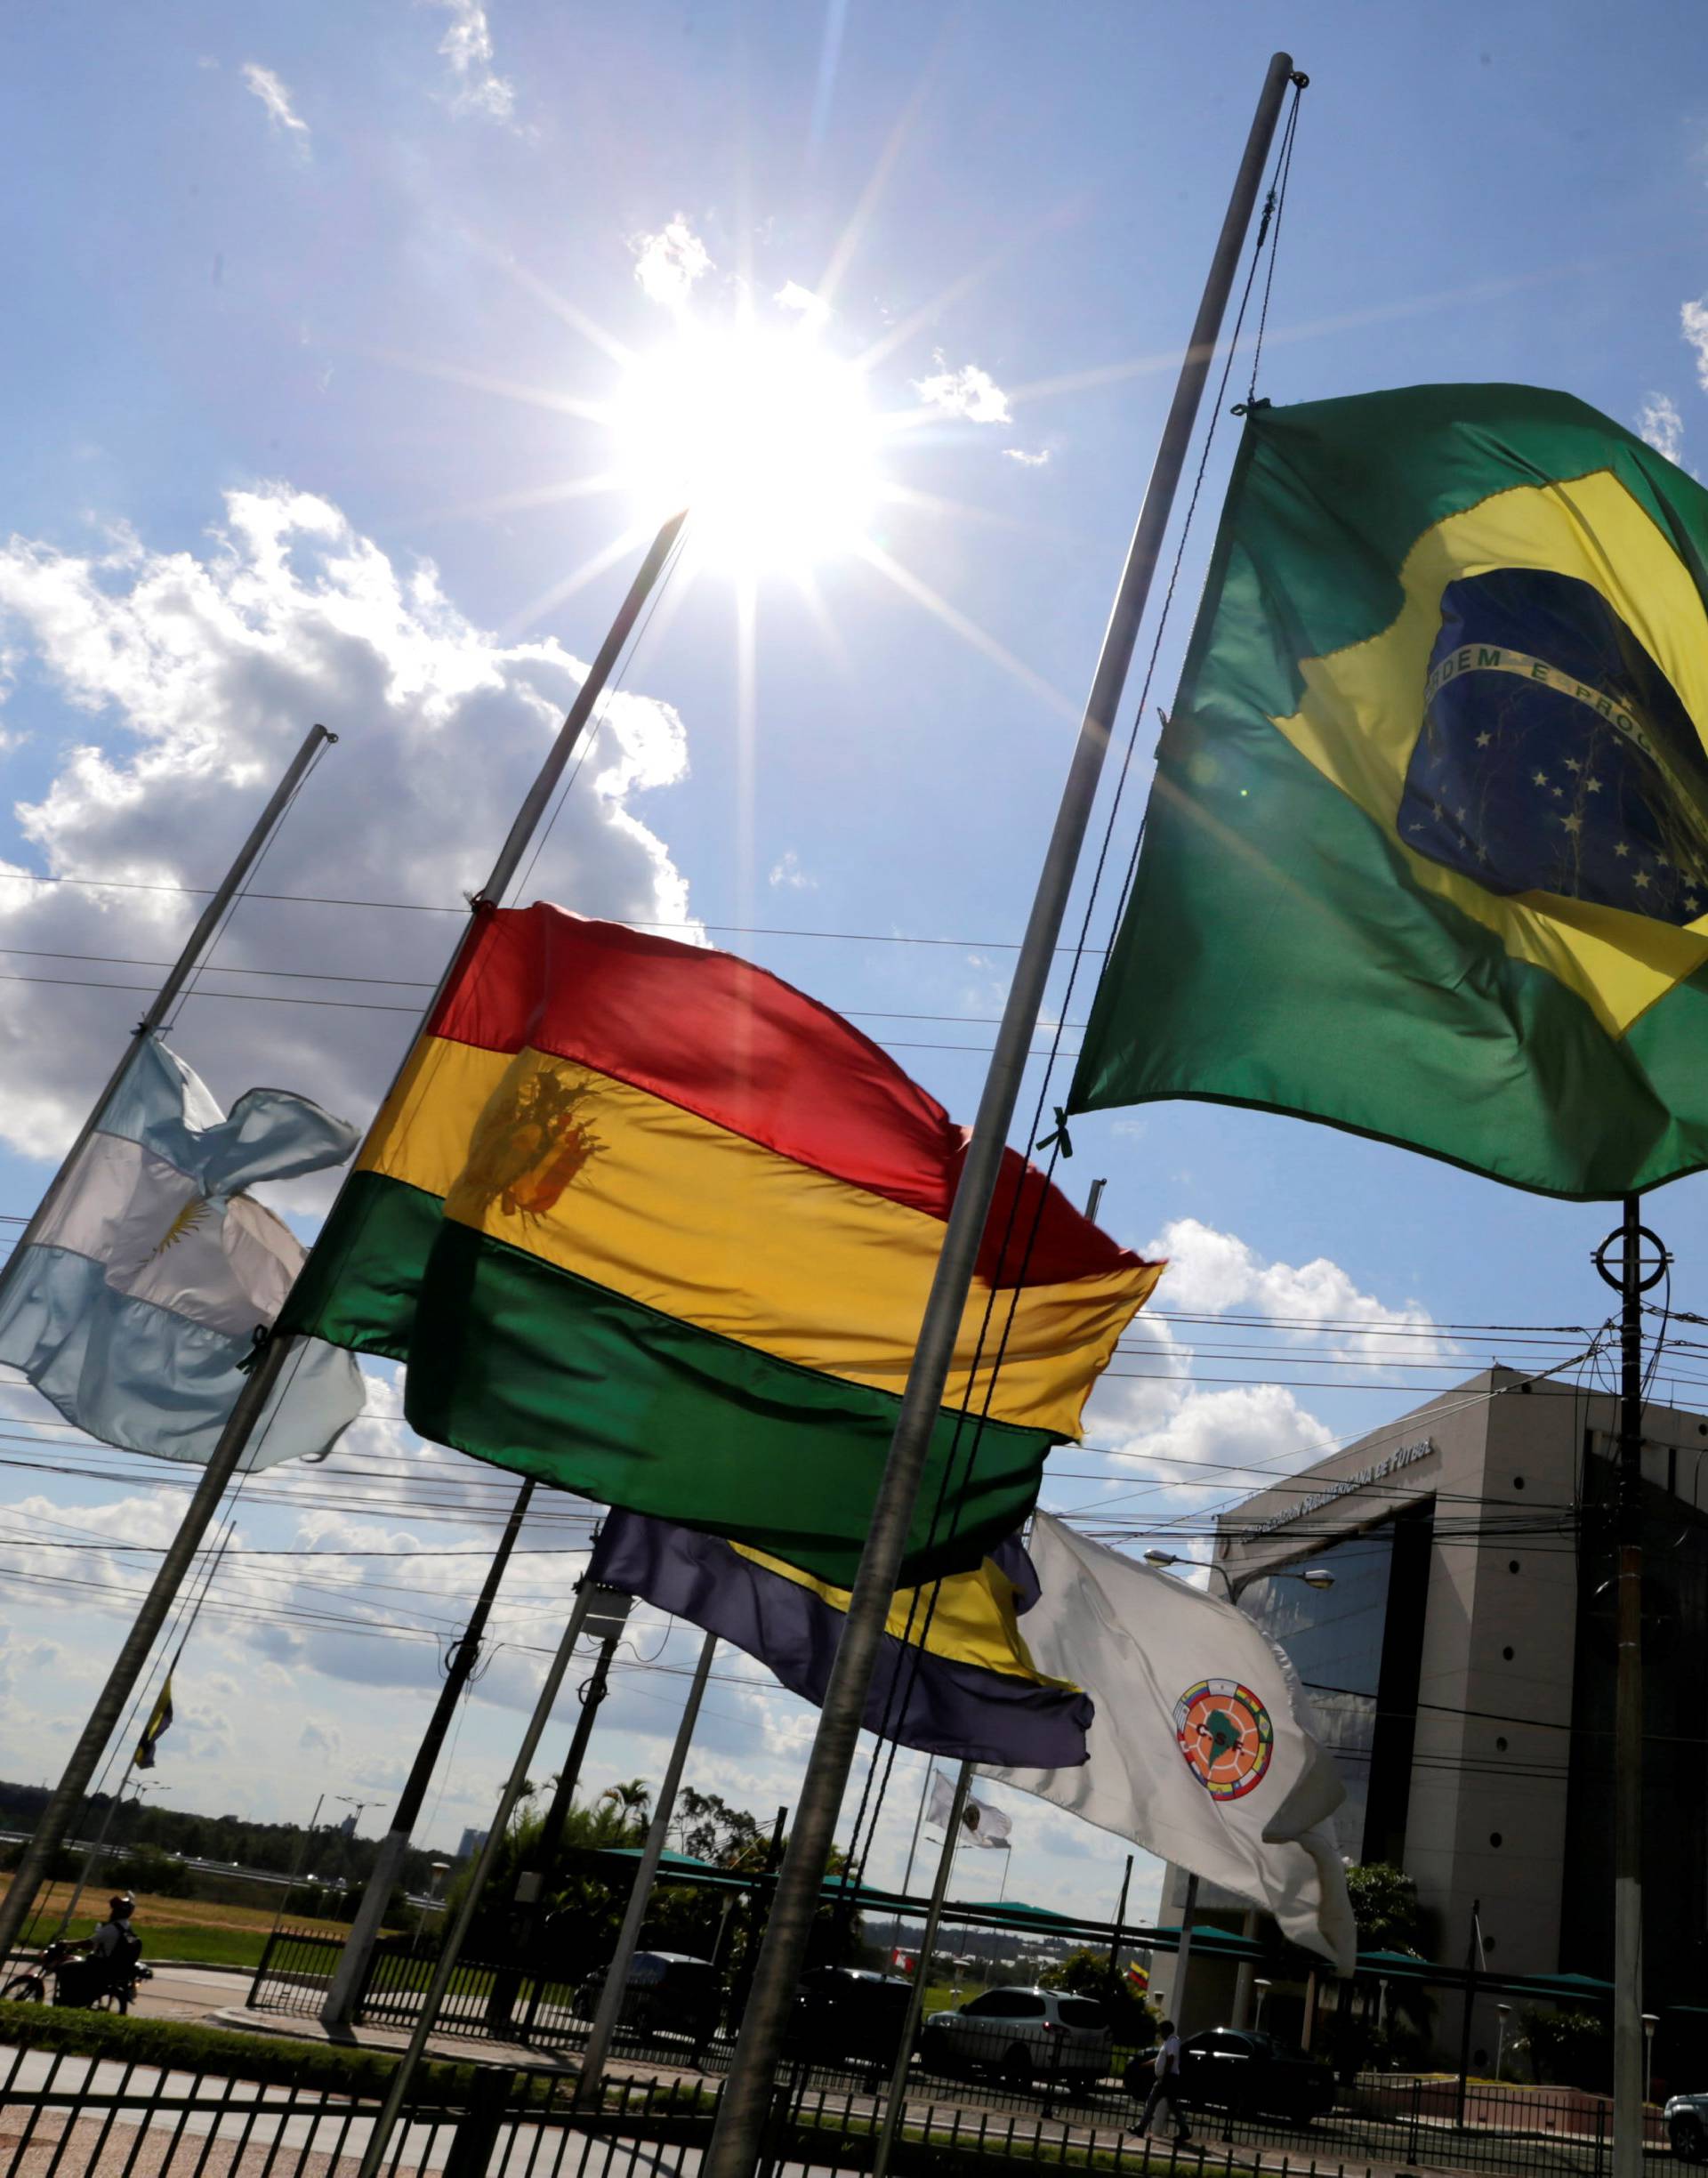 The flags of Brazil and the member countries of the CONMEBOL fly at half staff, paying tribute to members of Chapecoense soccer team in a plane crash in Colombia, in front of the headquarters in Luque